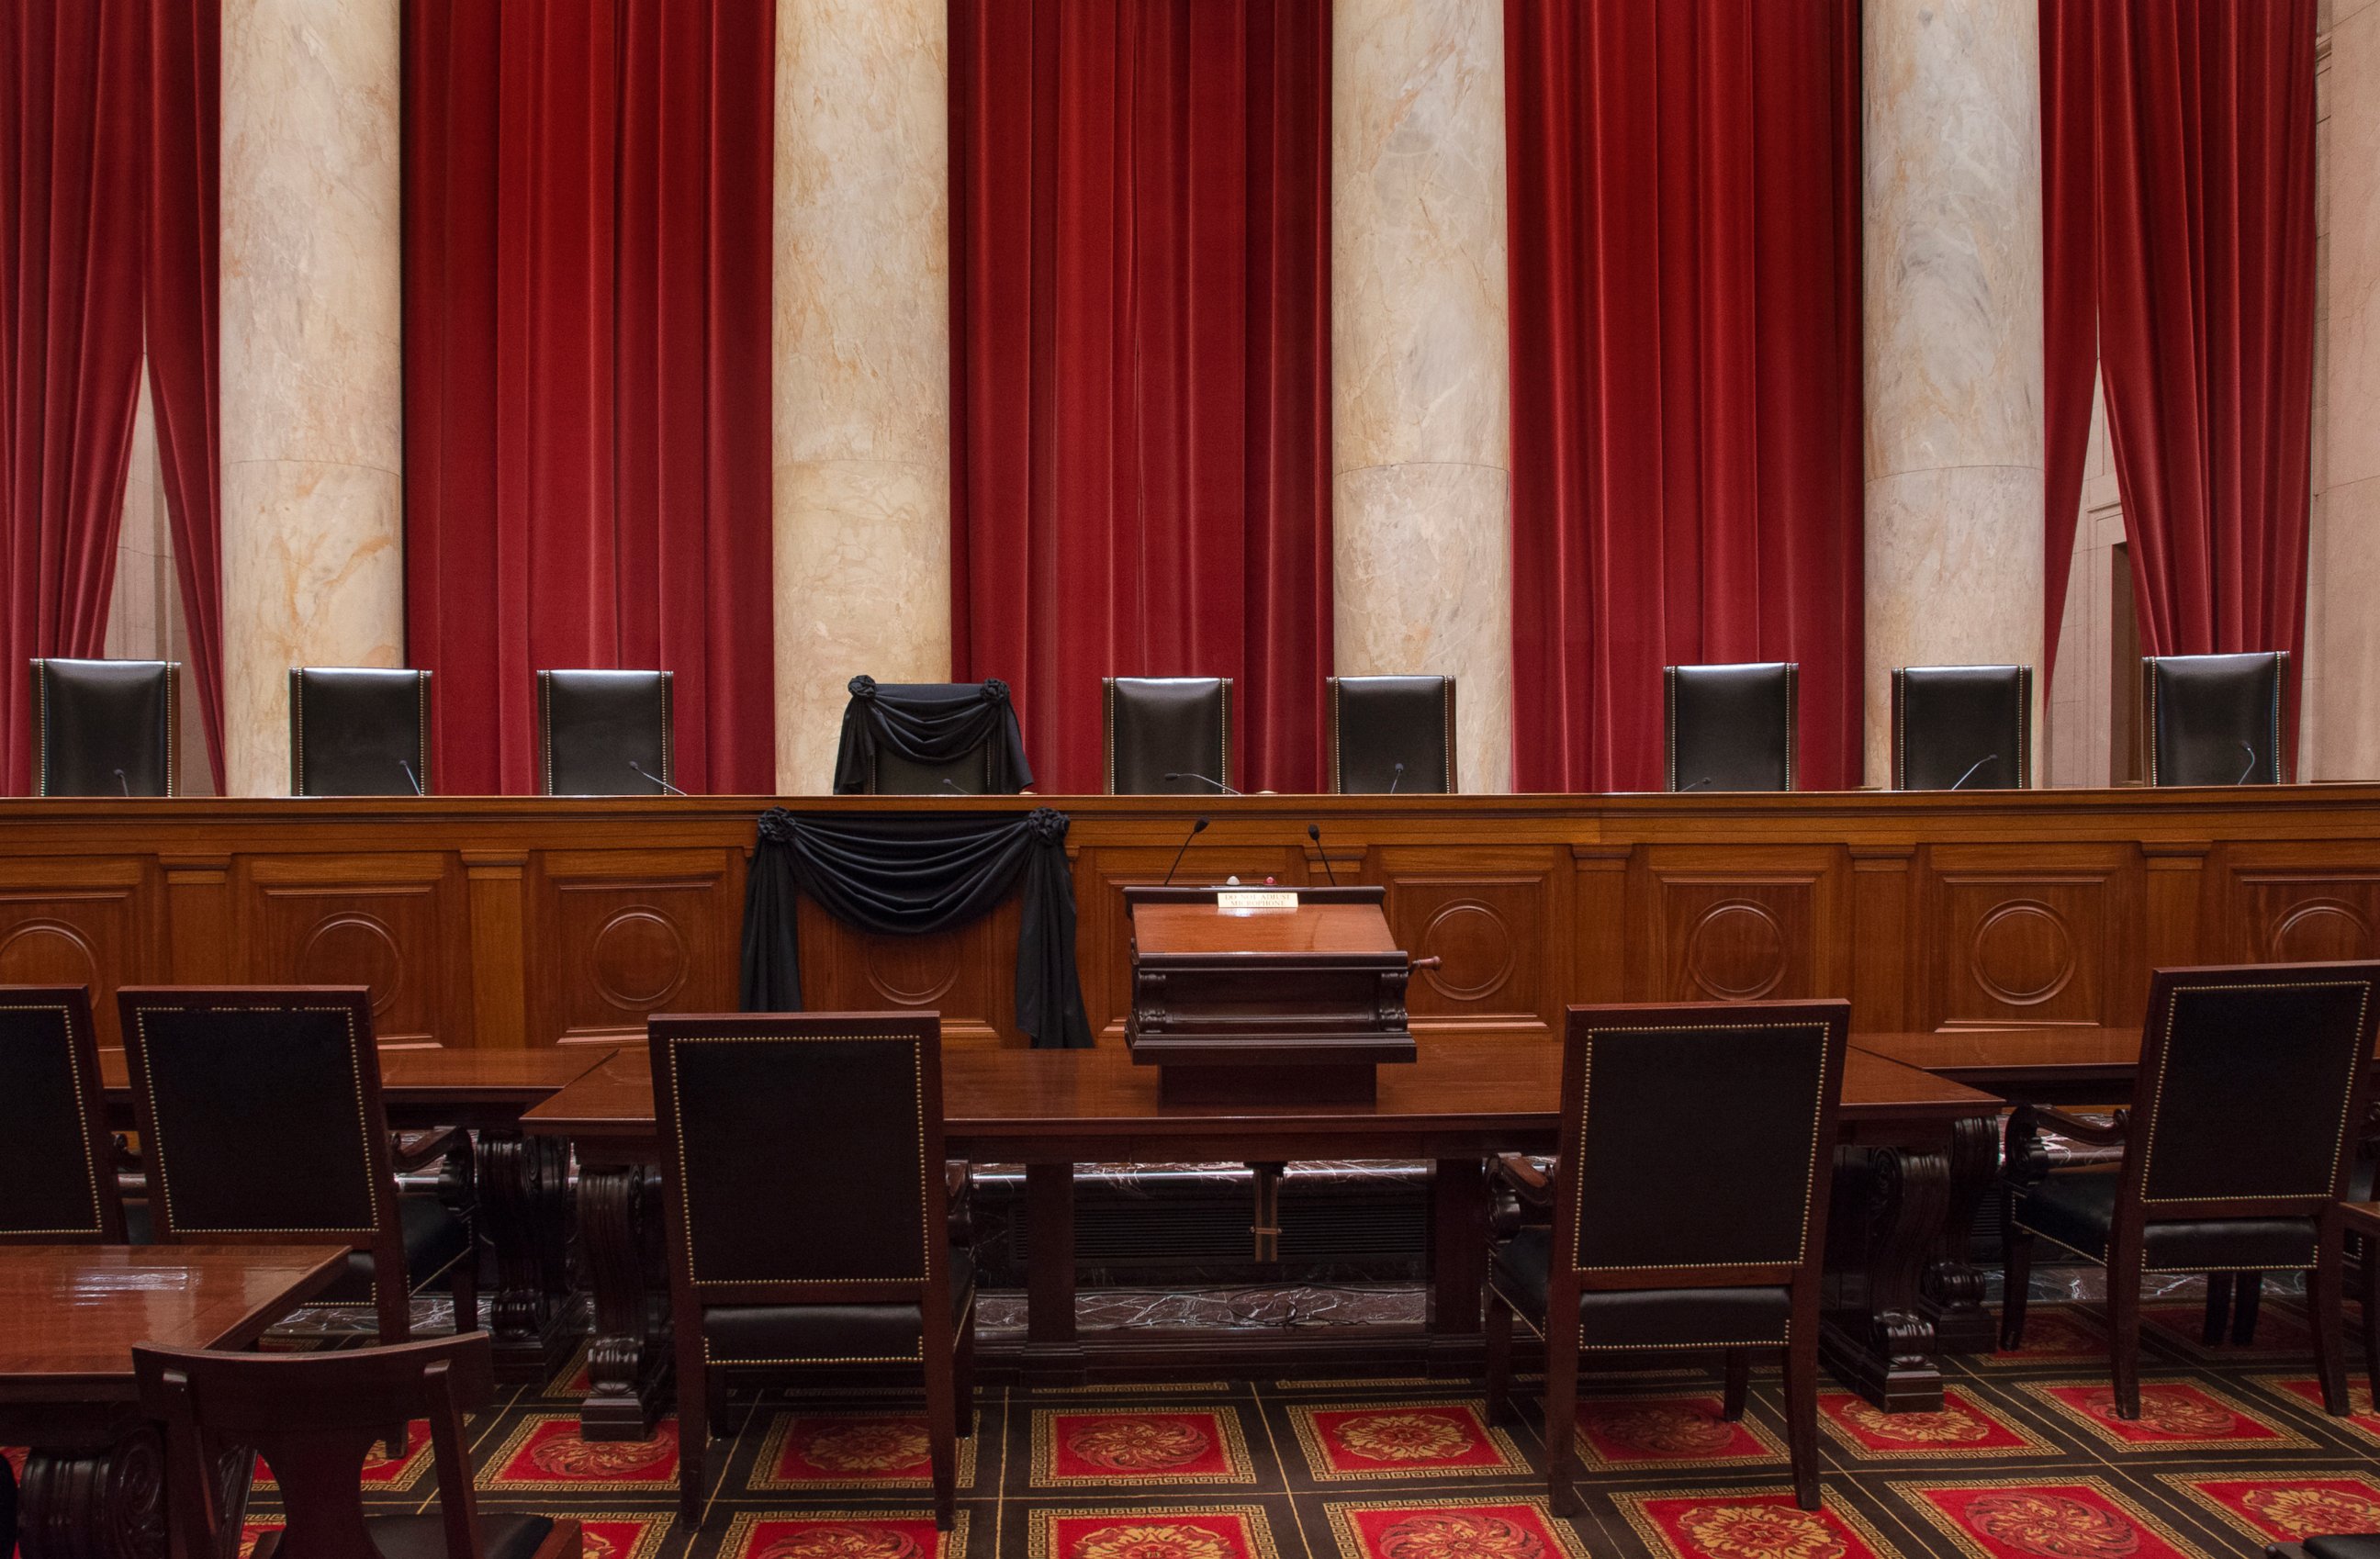 PHOTO: The courtroom of the Supreme Court showing Associate Justice Antonin Scalia's bench chair and the bench in front of his seat draped in black following his death on Feb. 13, 2016.  